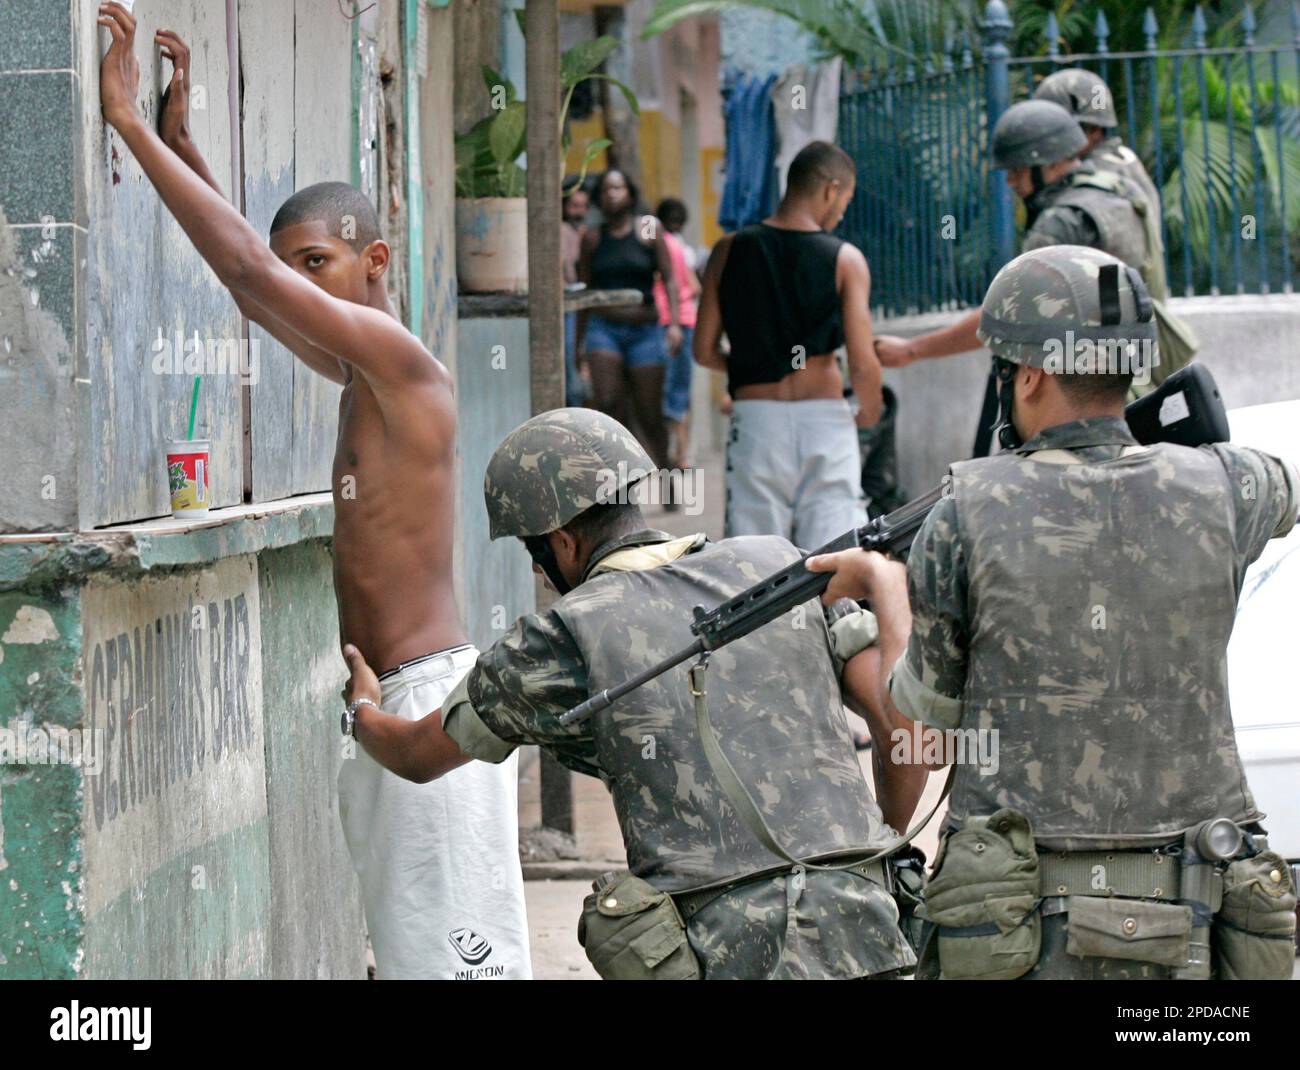 Brazilian soldiers search a man looking for guns at the entrance